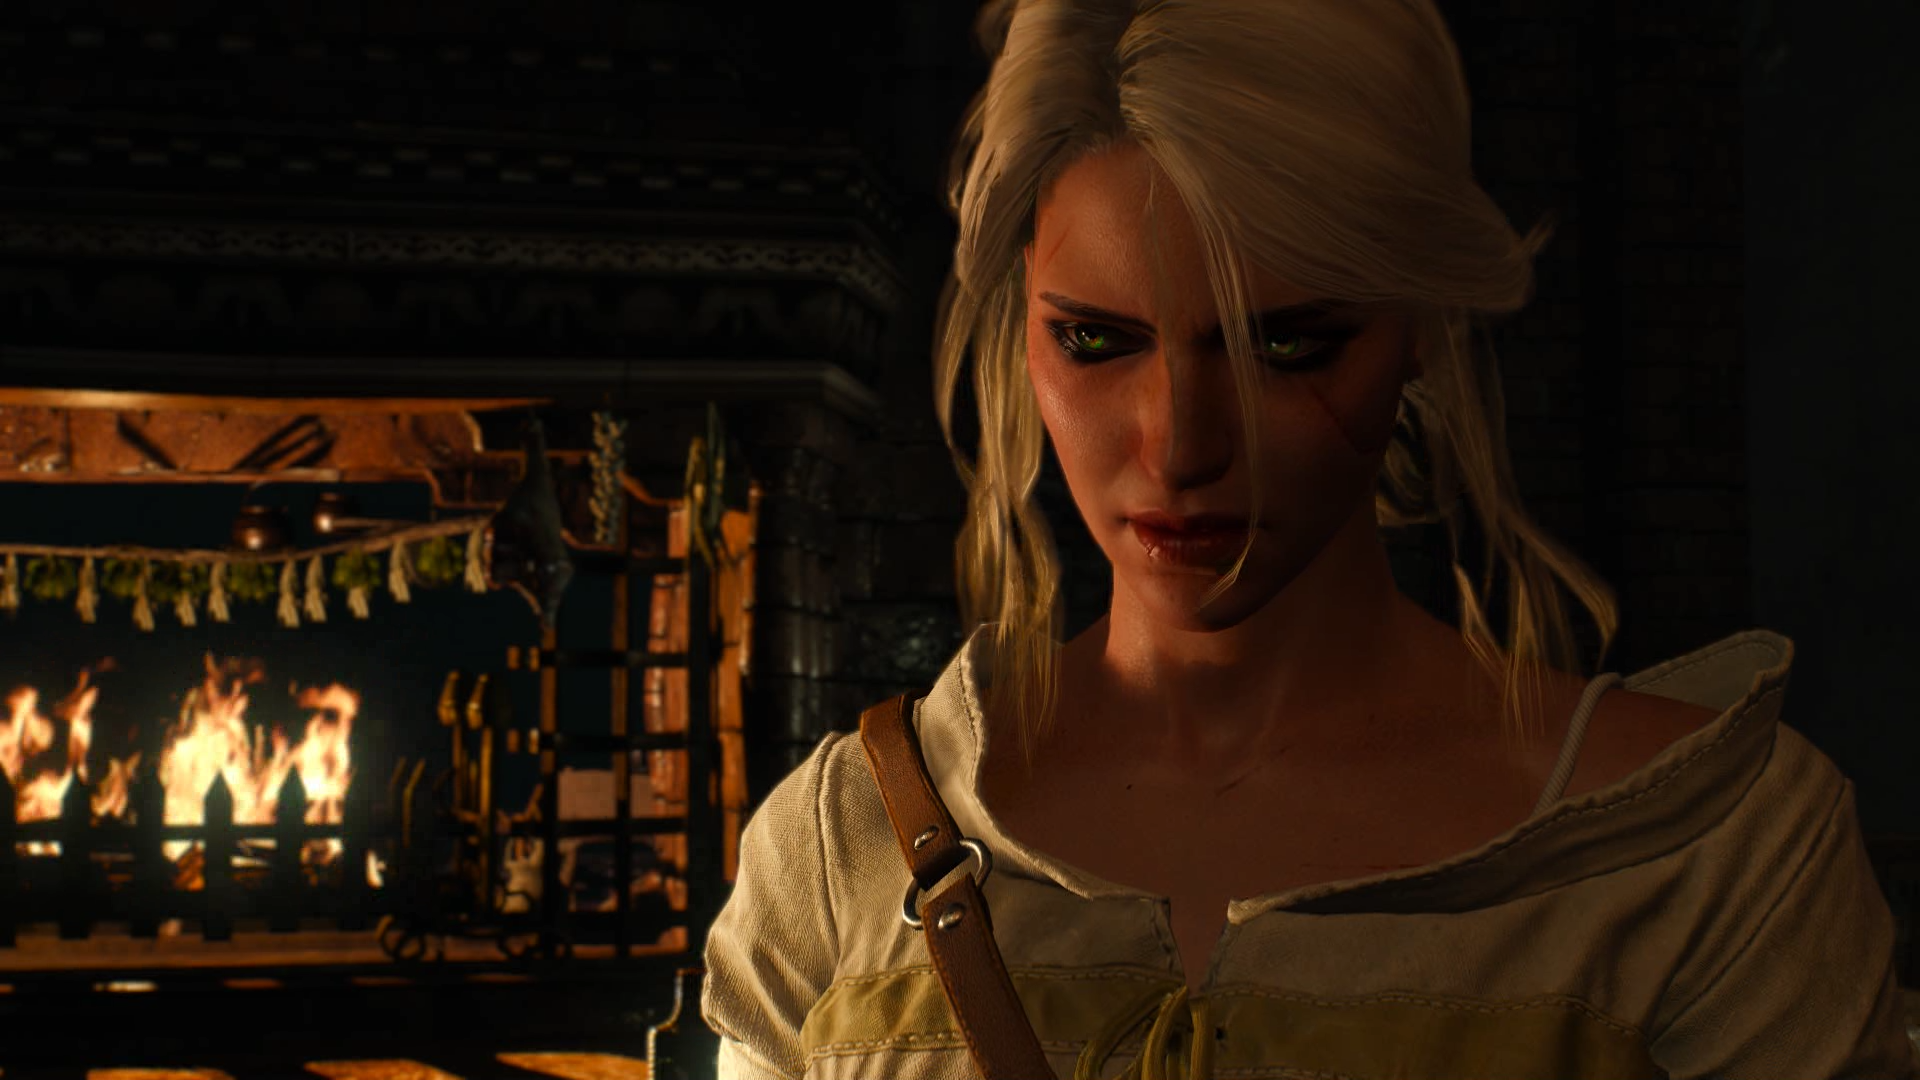 General 1920x1080 The Witcher 3: Wild Hunt Cirilla Fiona Elen Riannon video game characters video games